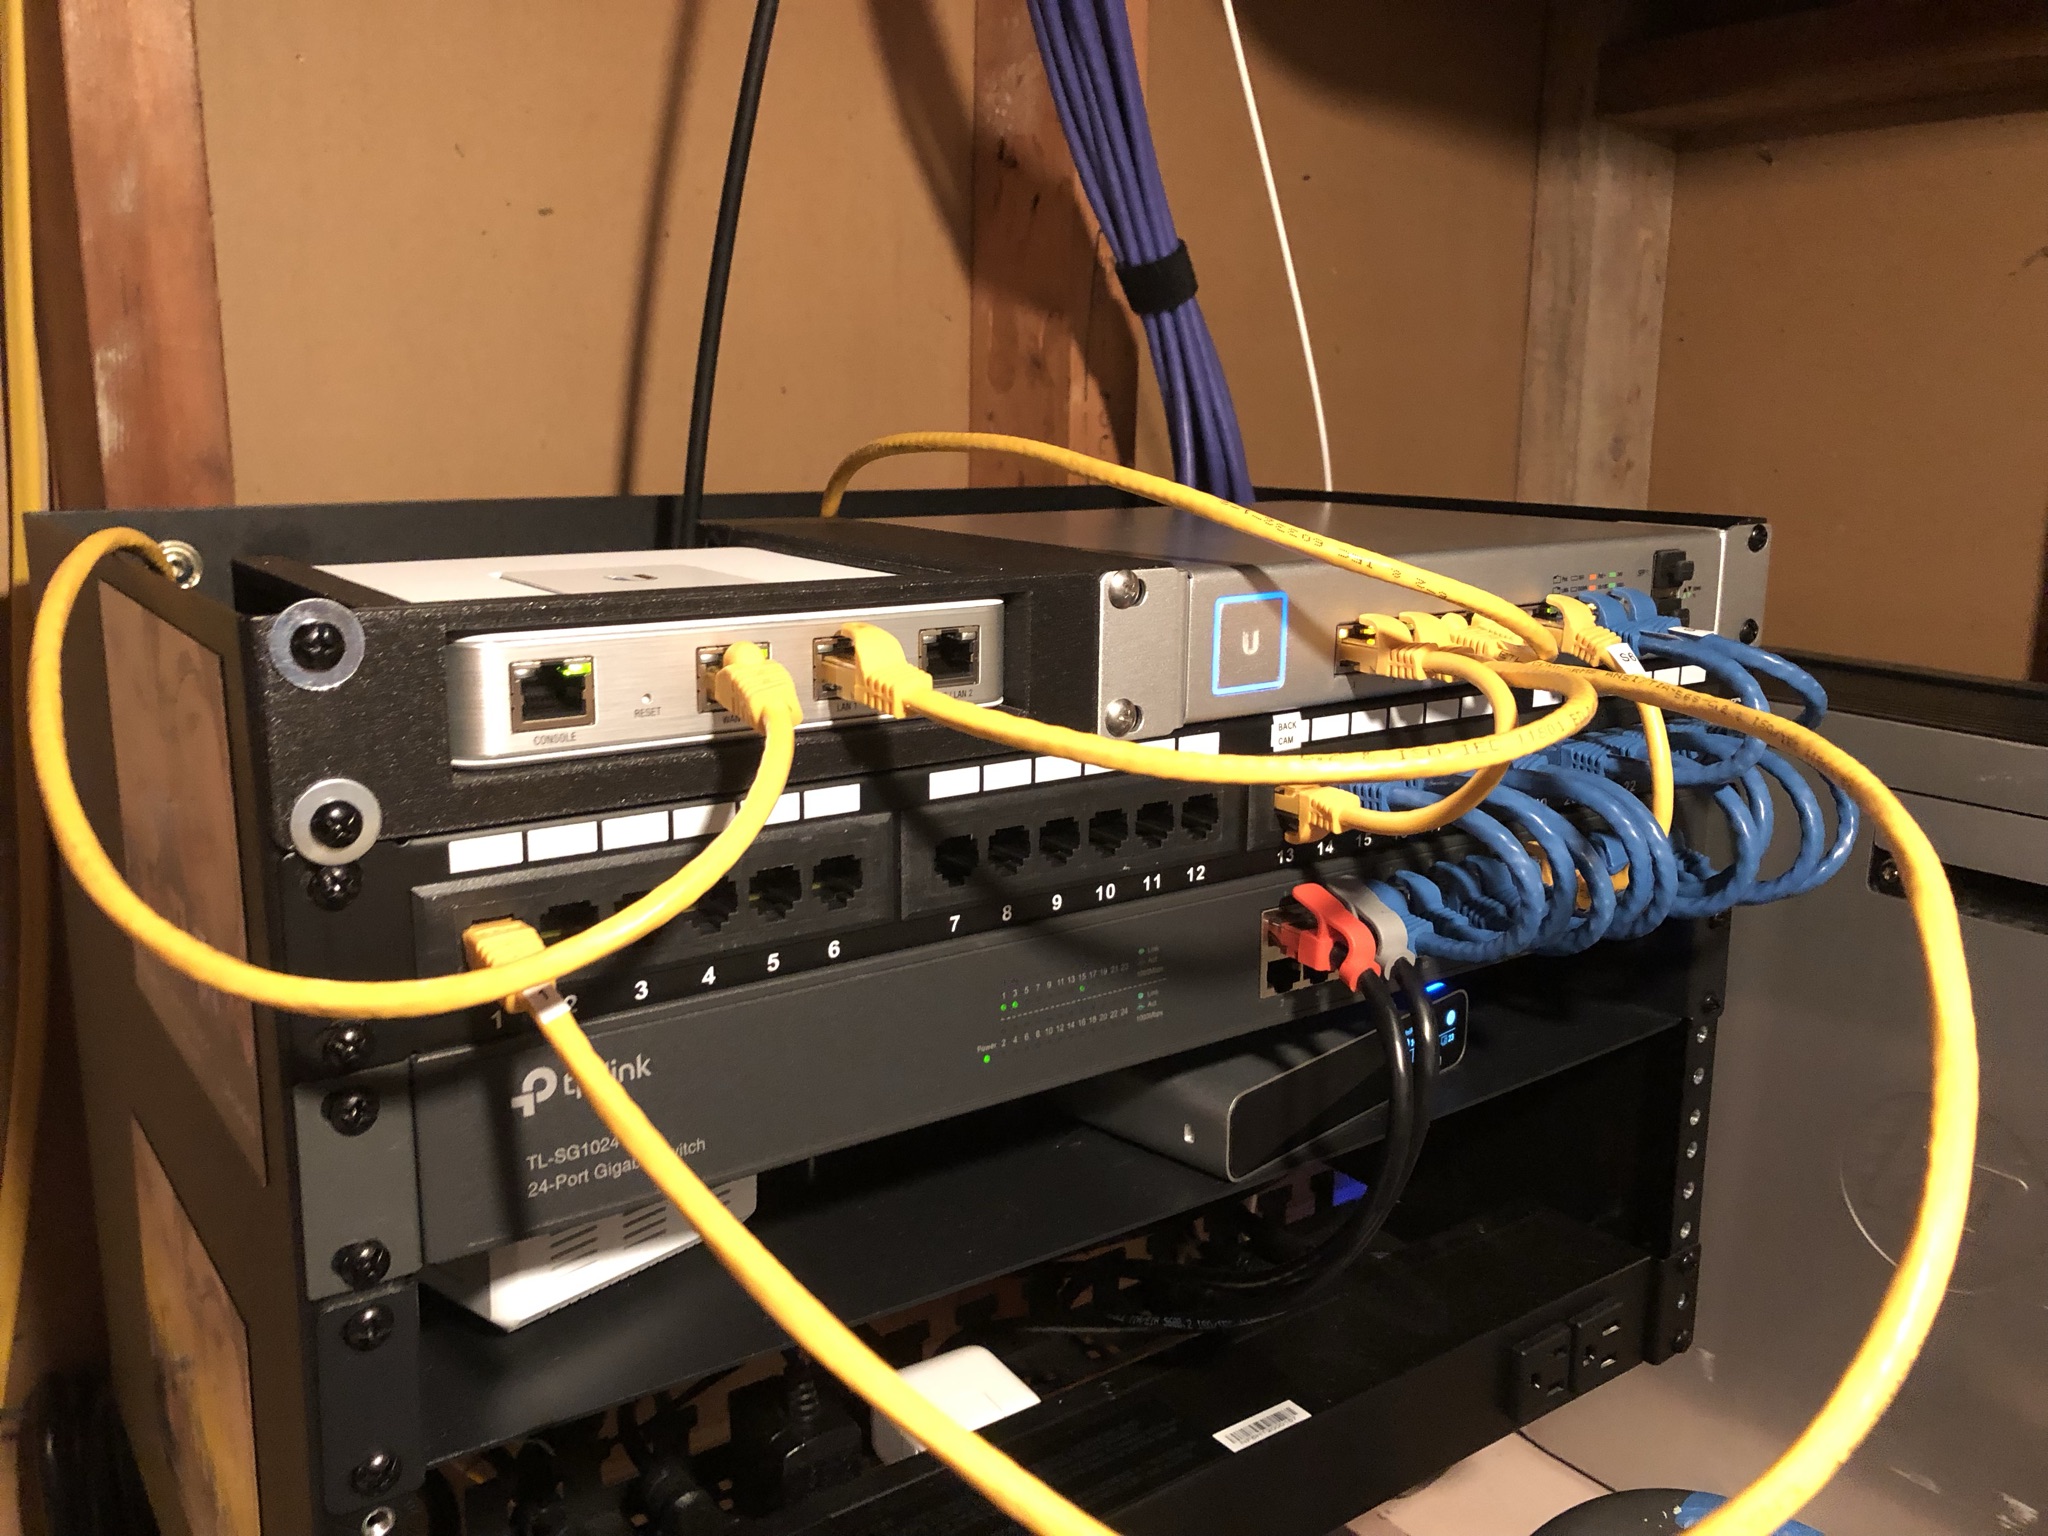 Unifi USG Rack Mount Adapter with Cooling